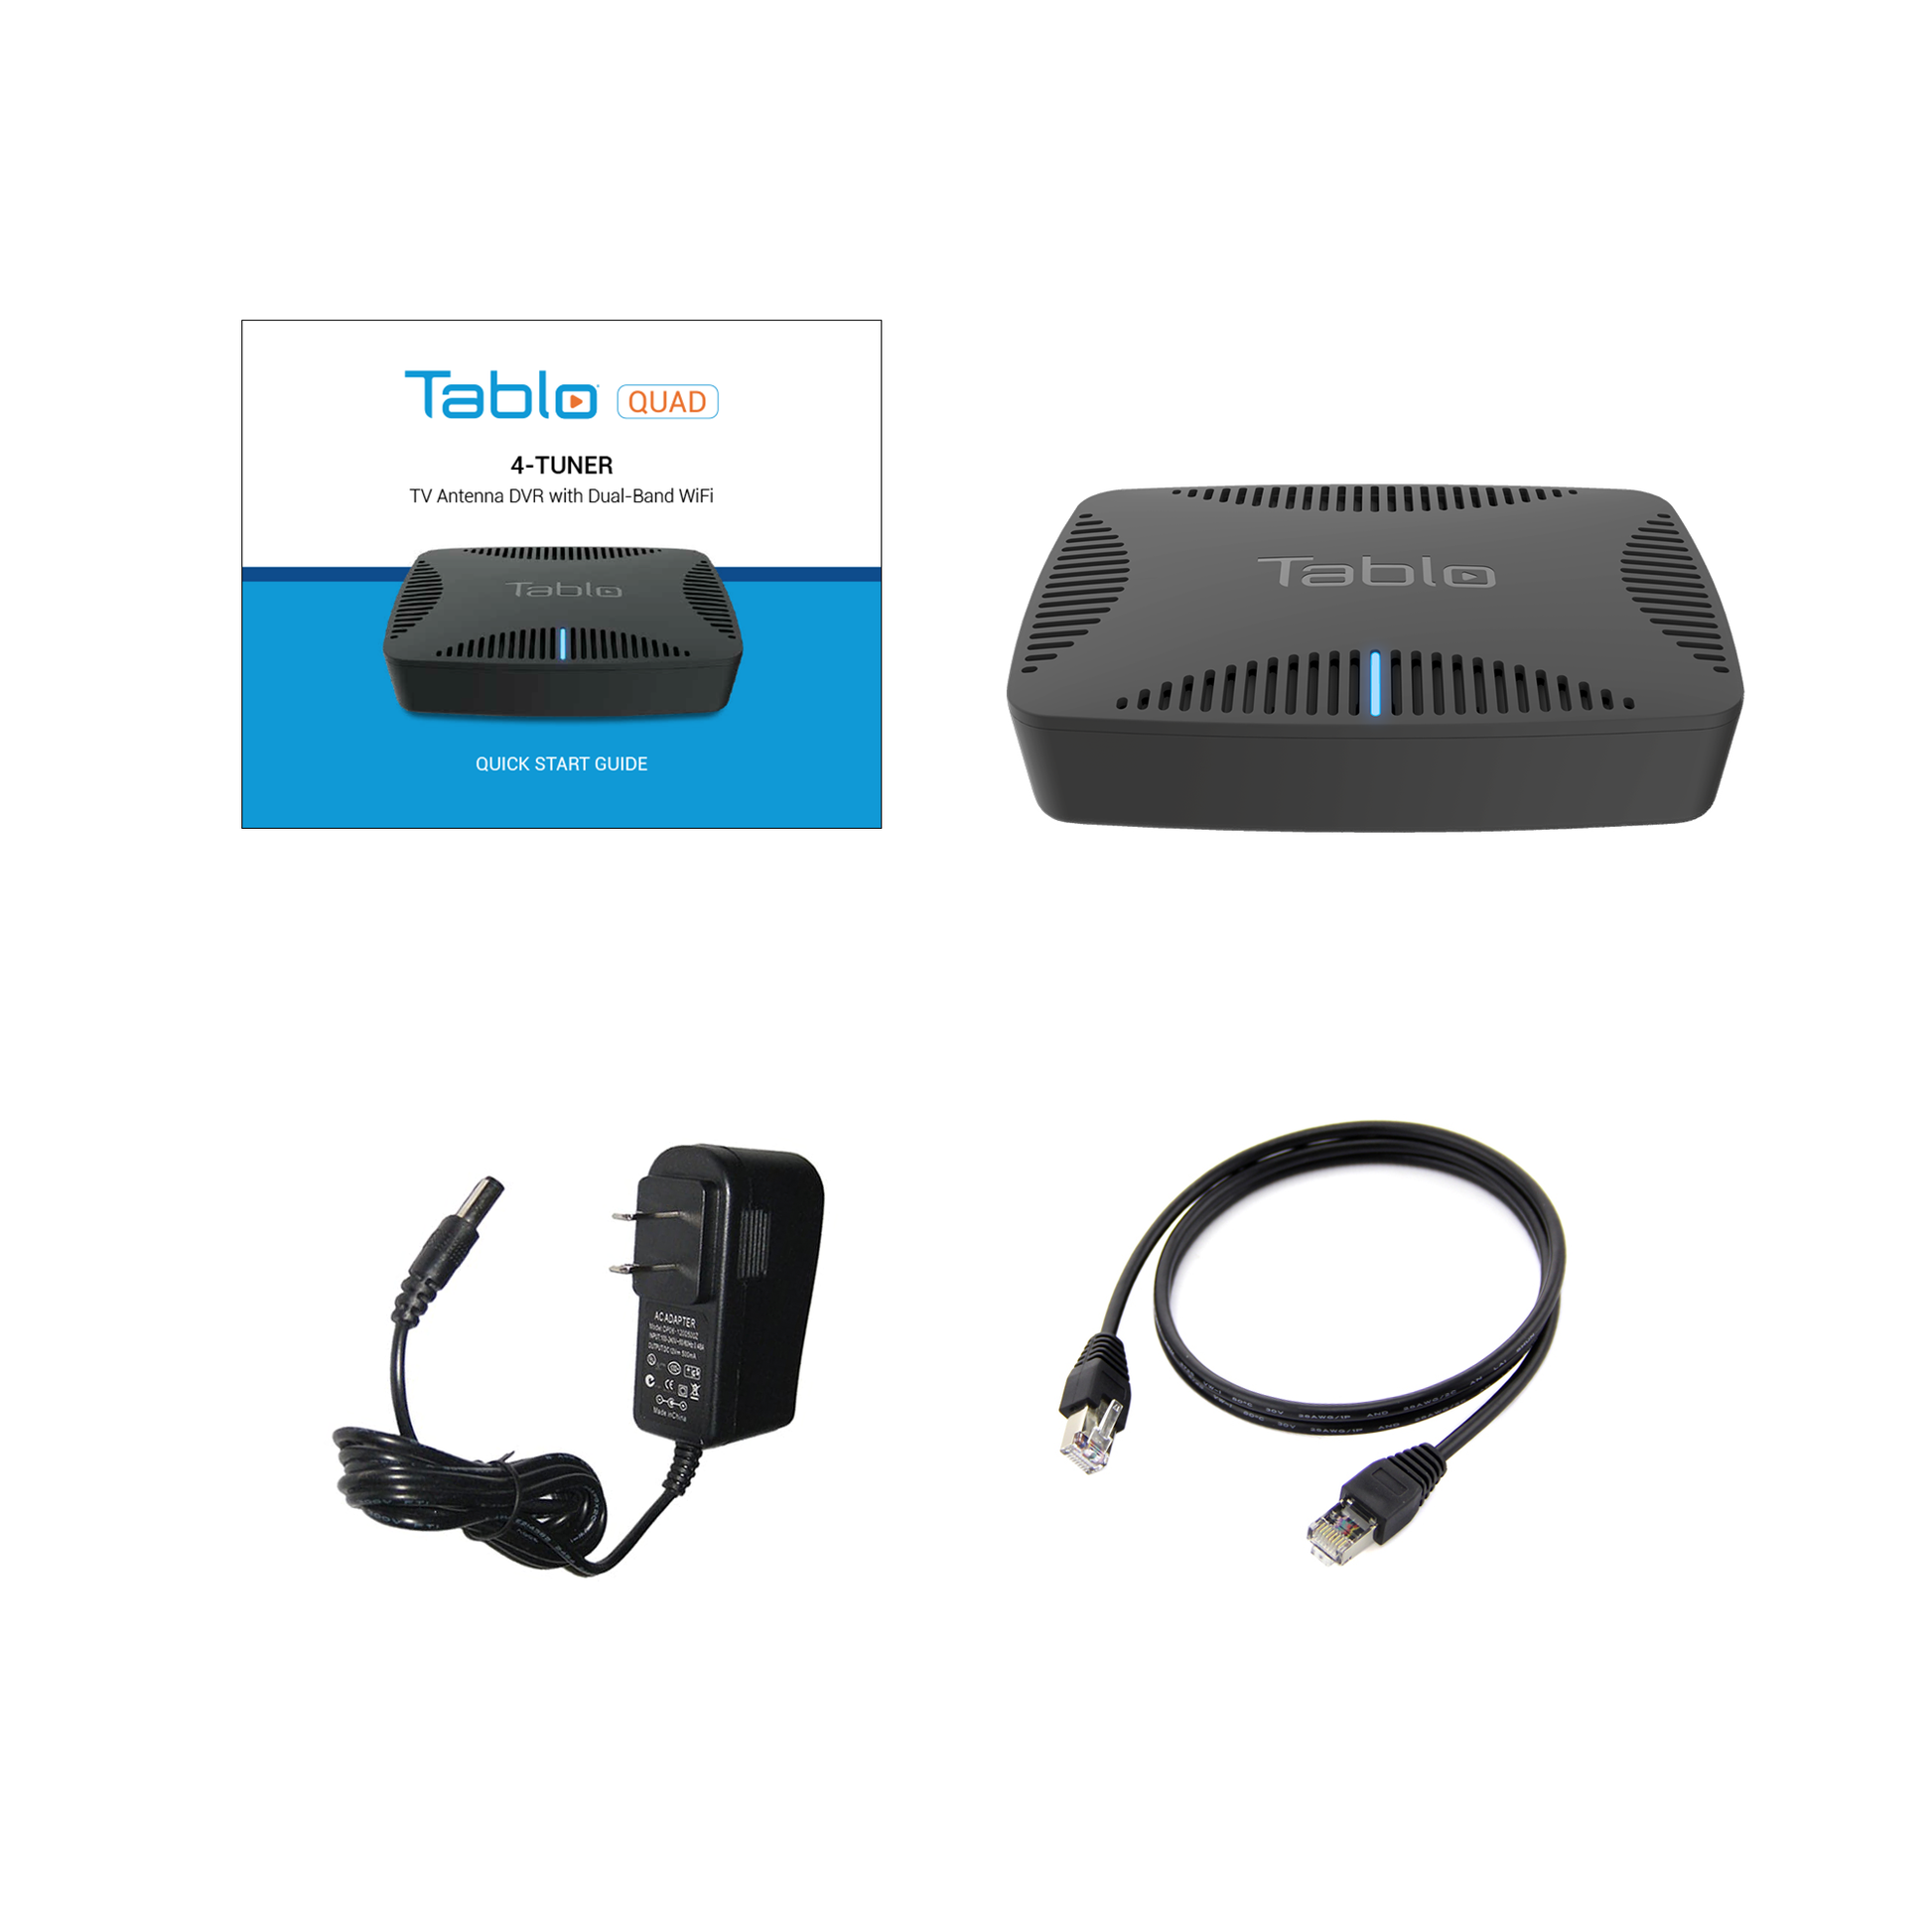 Tablo QUAD Over-The-Air (OTA) DVR (Digital Video Recorder) for Cord Cutters. What's in the box: Quick Start Guide, Tablo OTA DVR, power adapter, ethernet cable.